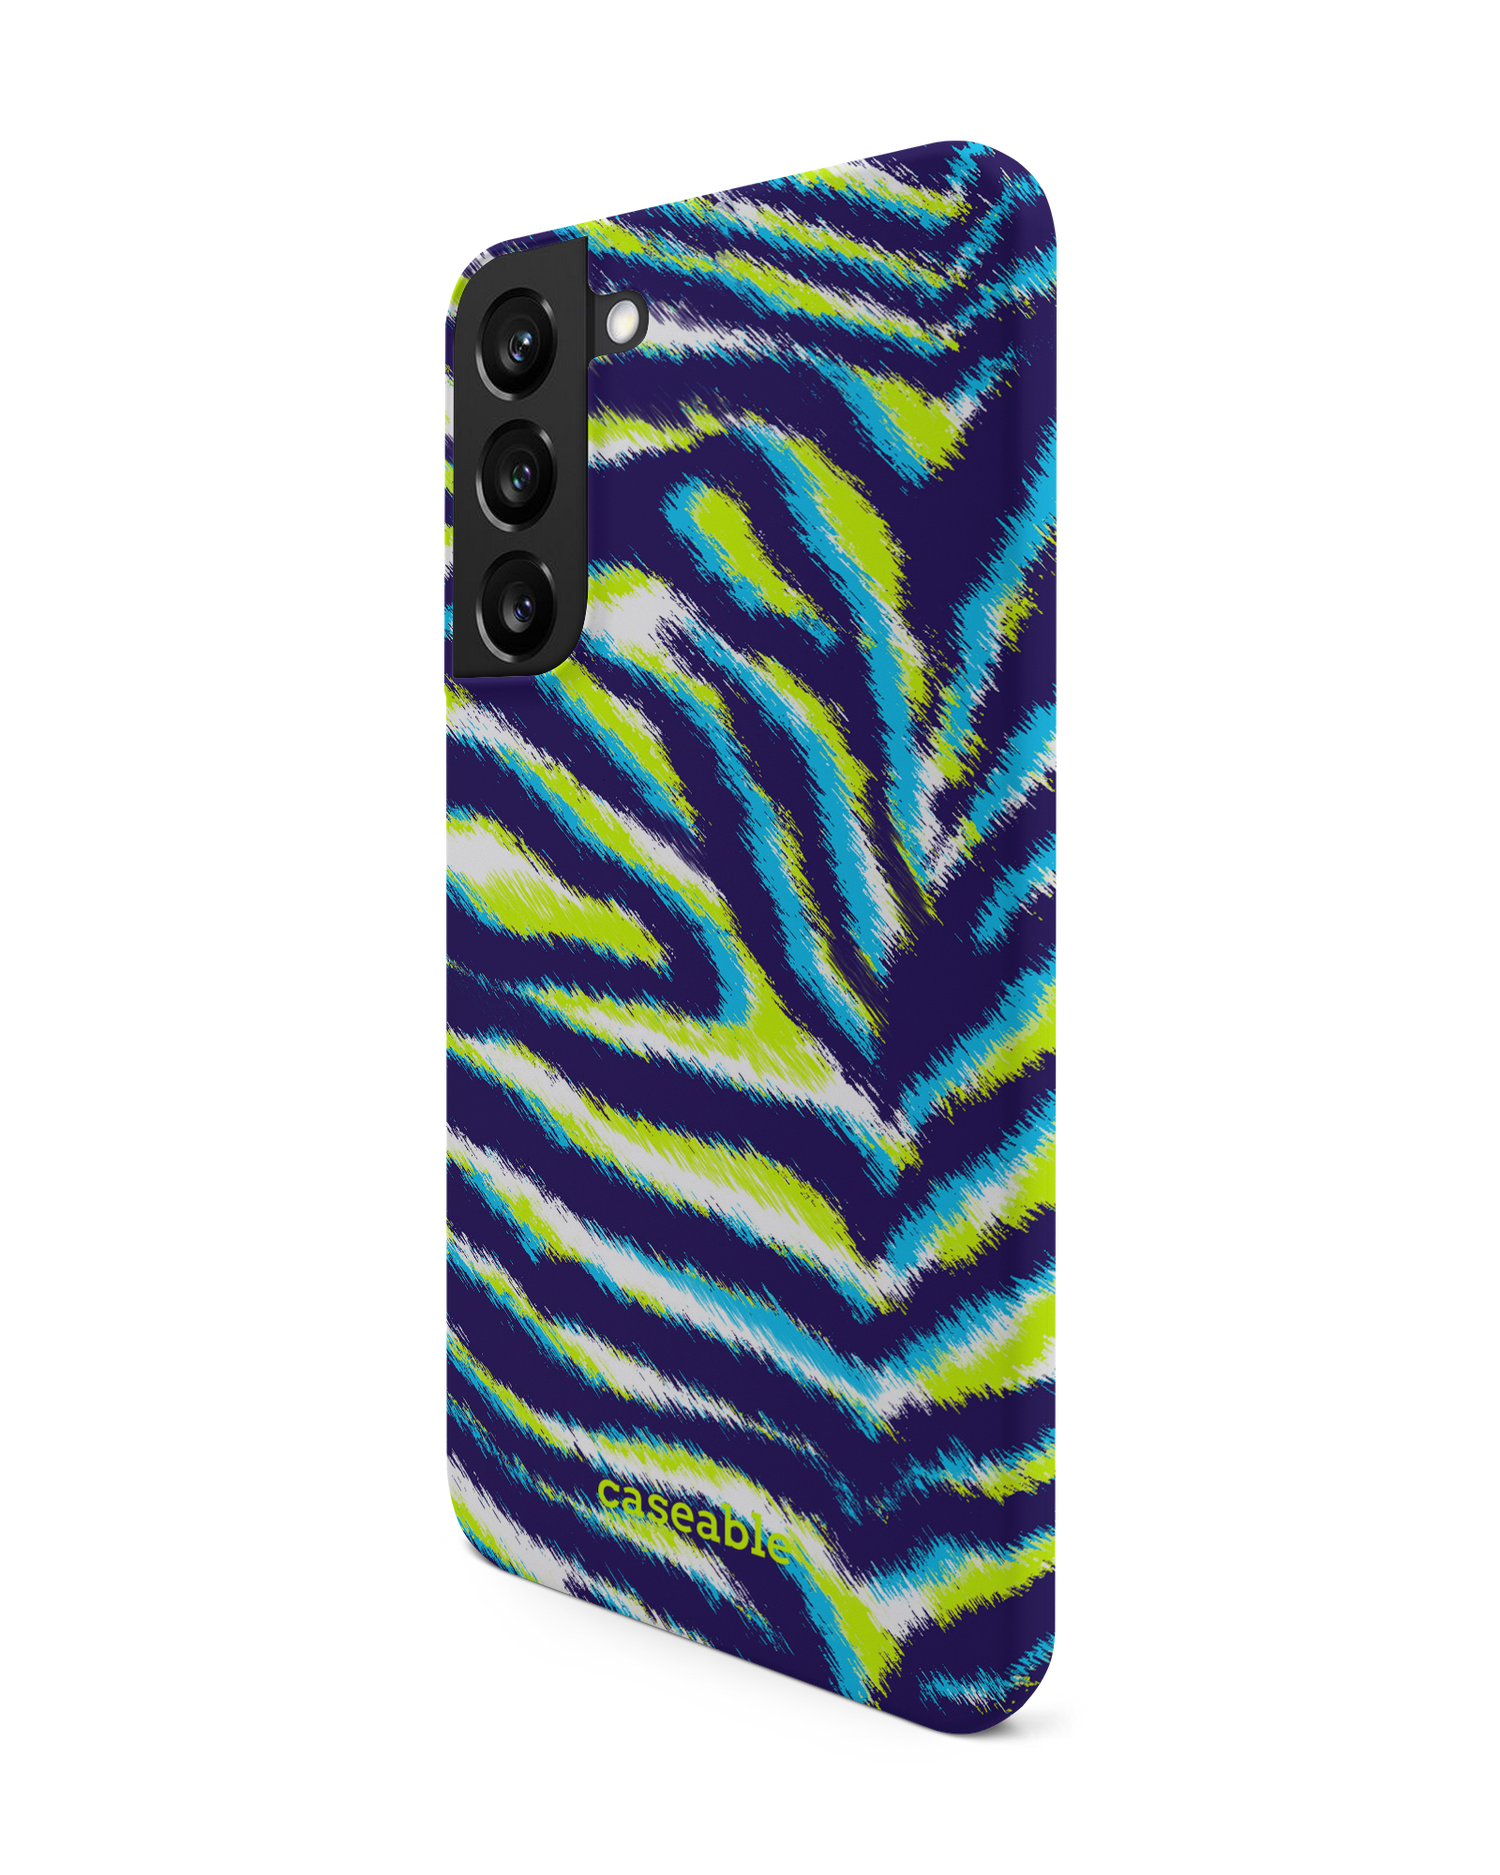 Neon Zebra Hard Shell Phone Case Samsung Galaxy S22 Plus 5G: View from the right side